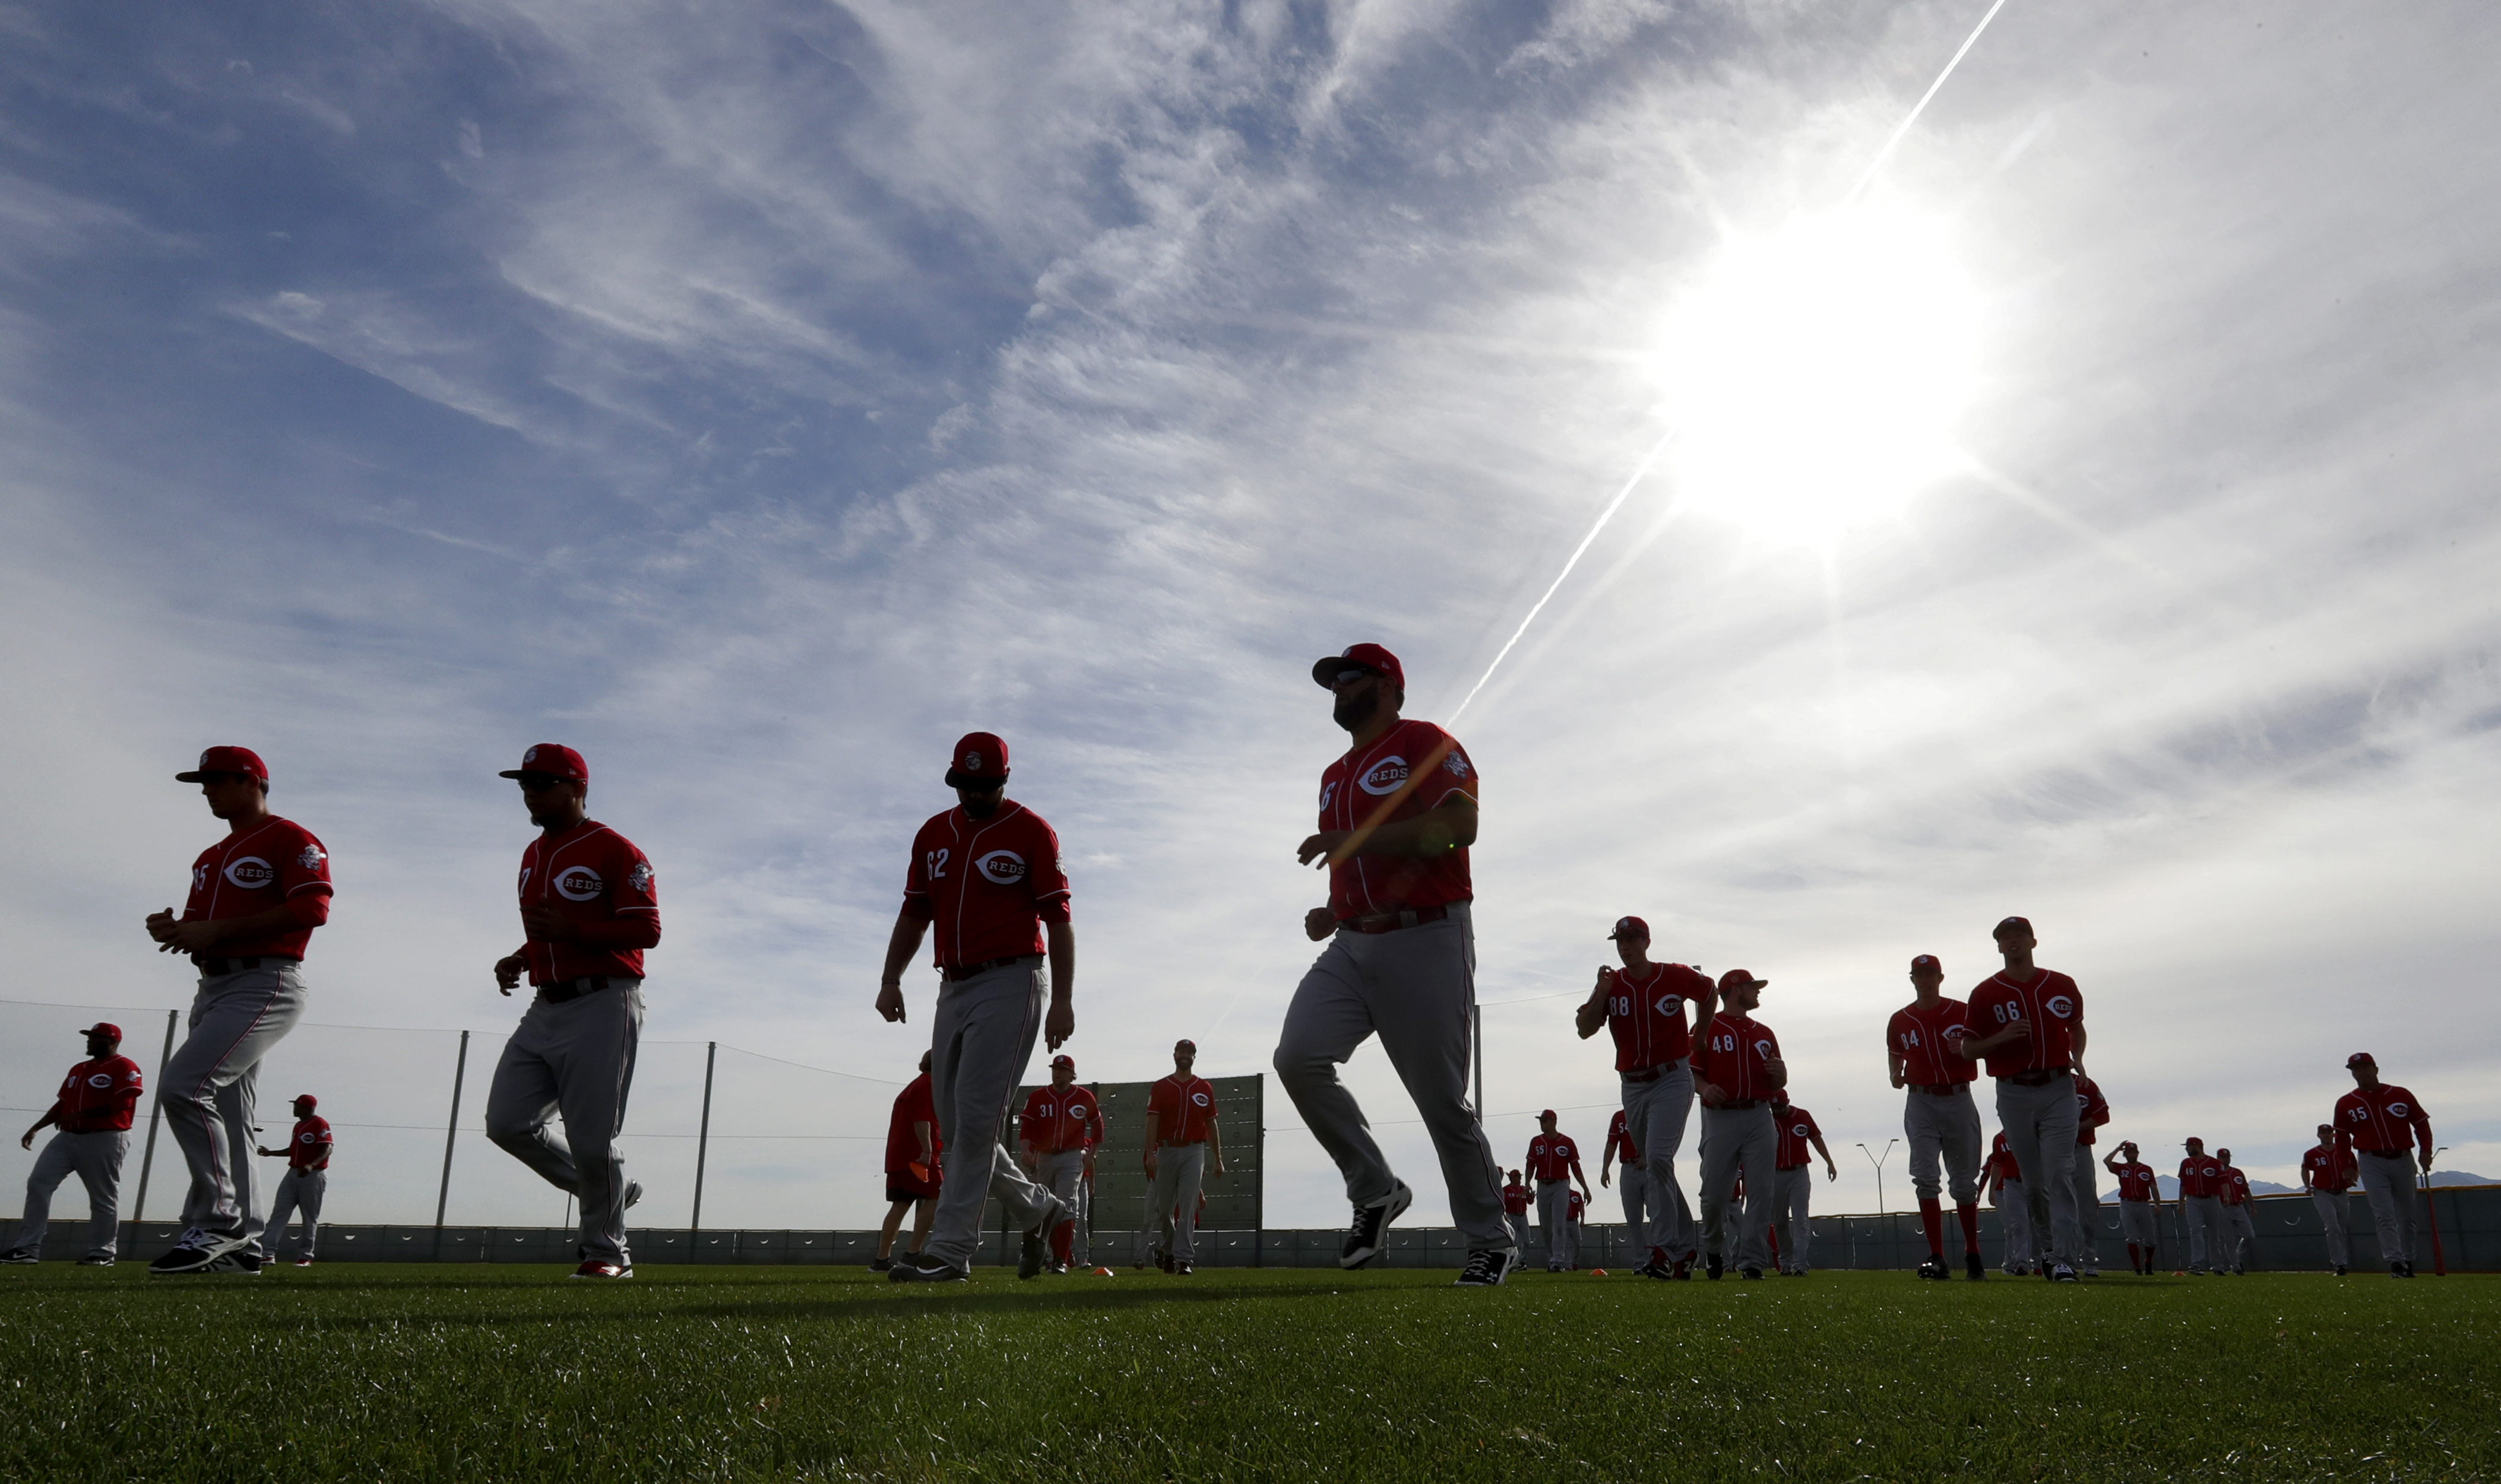 The Cincinnati Reds take the field for their first day of spring training baseball workouts, Tuesday, Feb. 14, 2017, in Goodyear, Ariz. (AP Photo/Matt York)